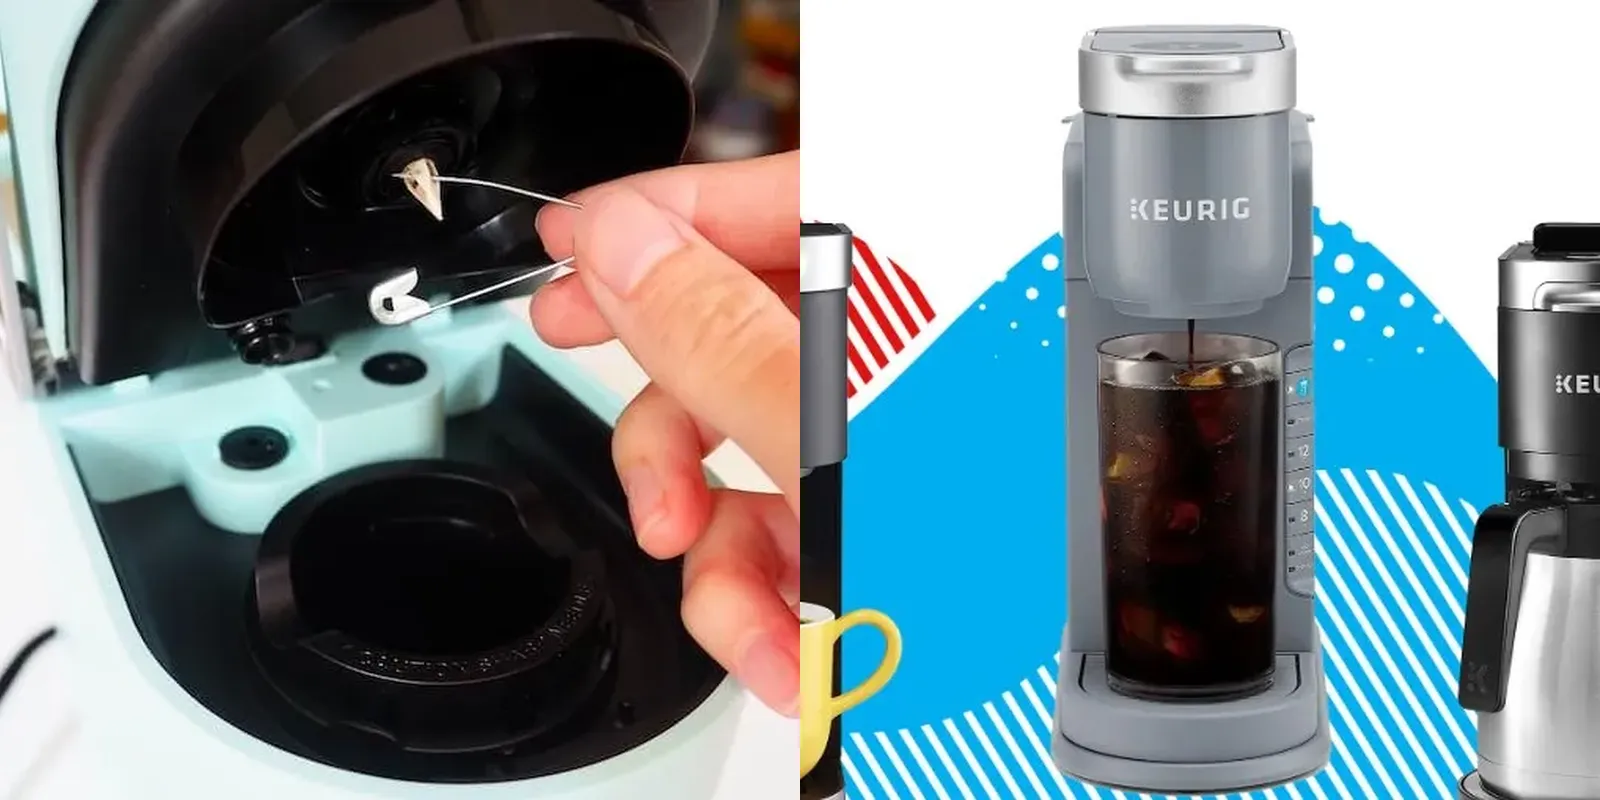 How To Prime A Keurig